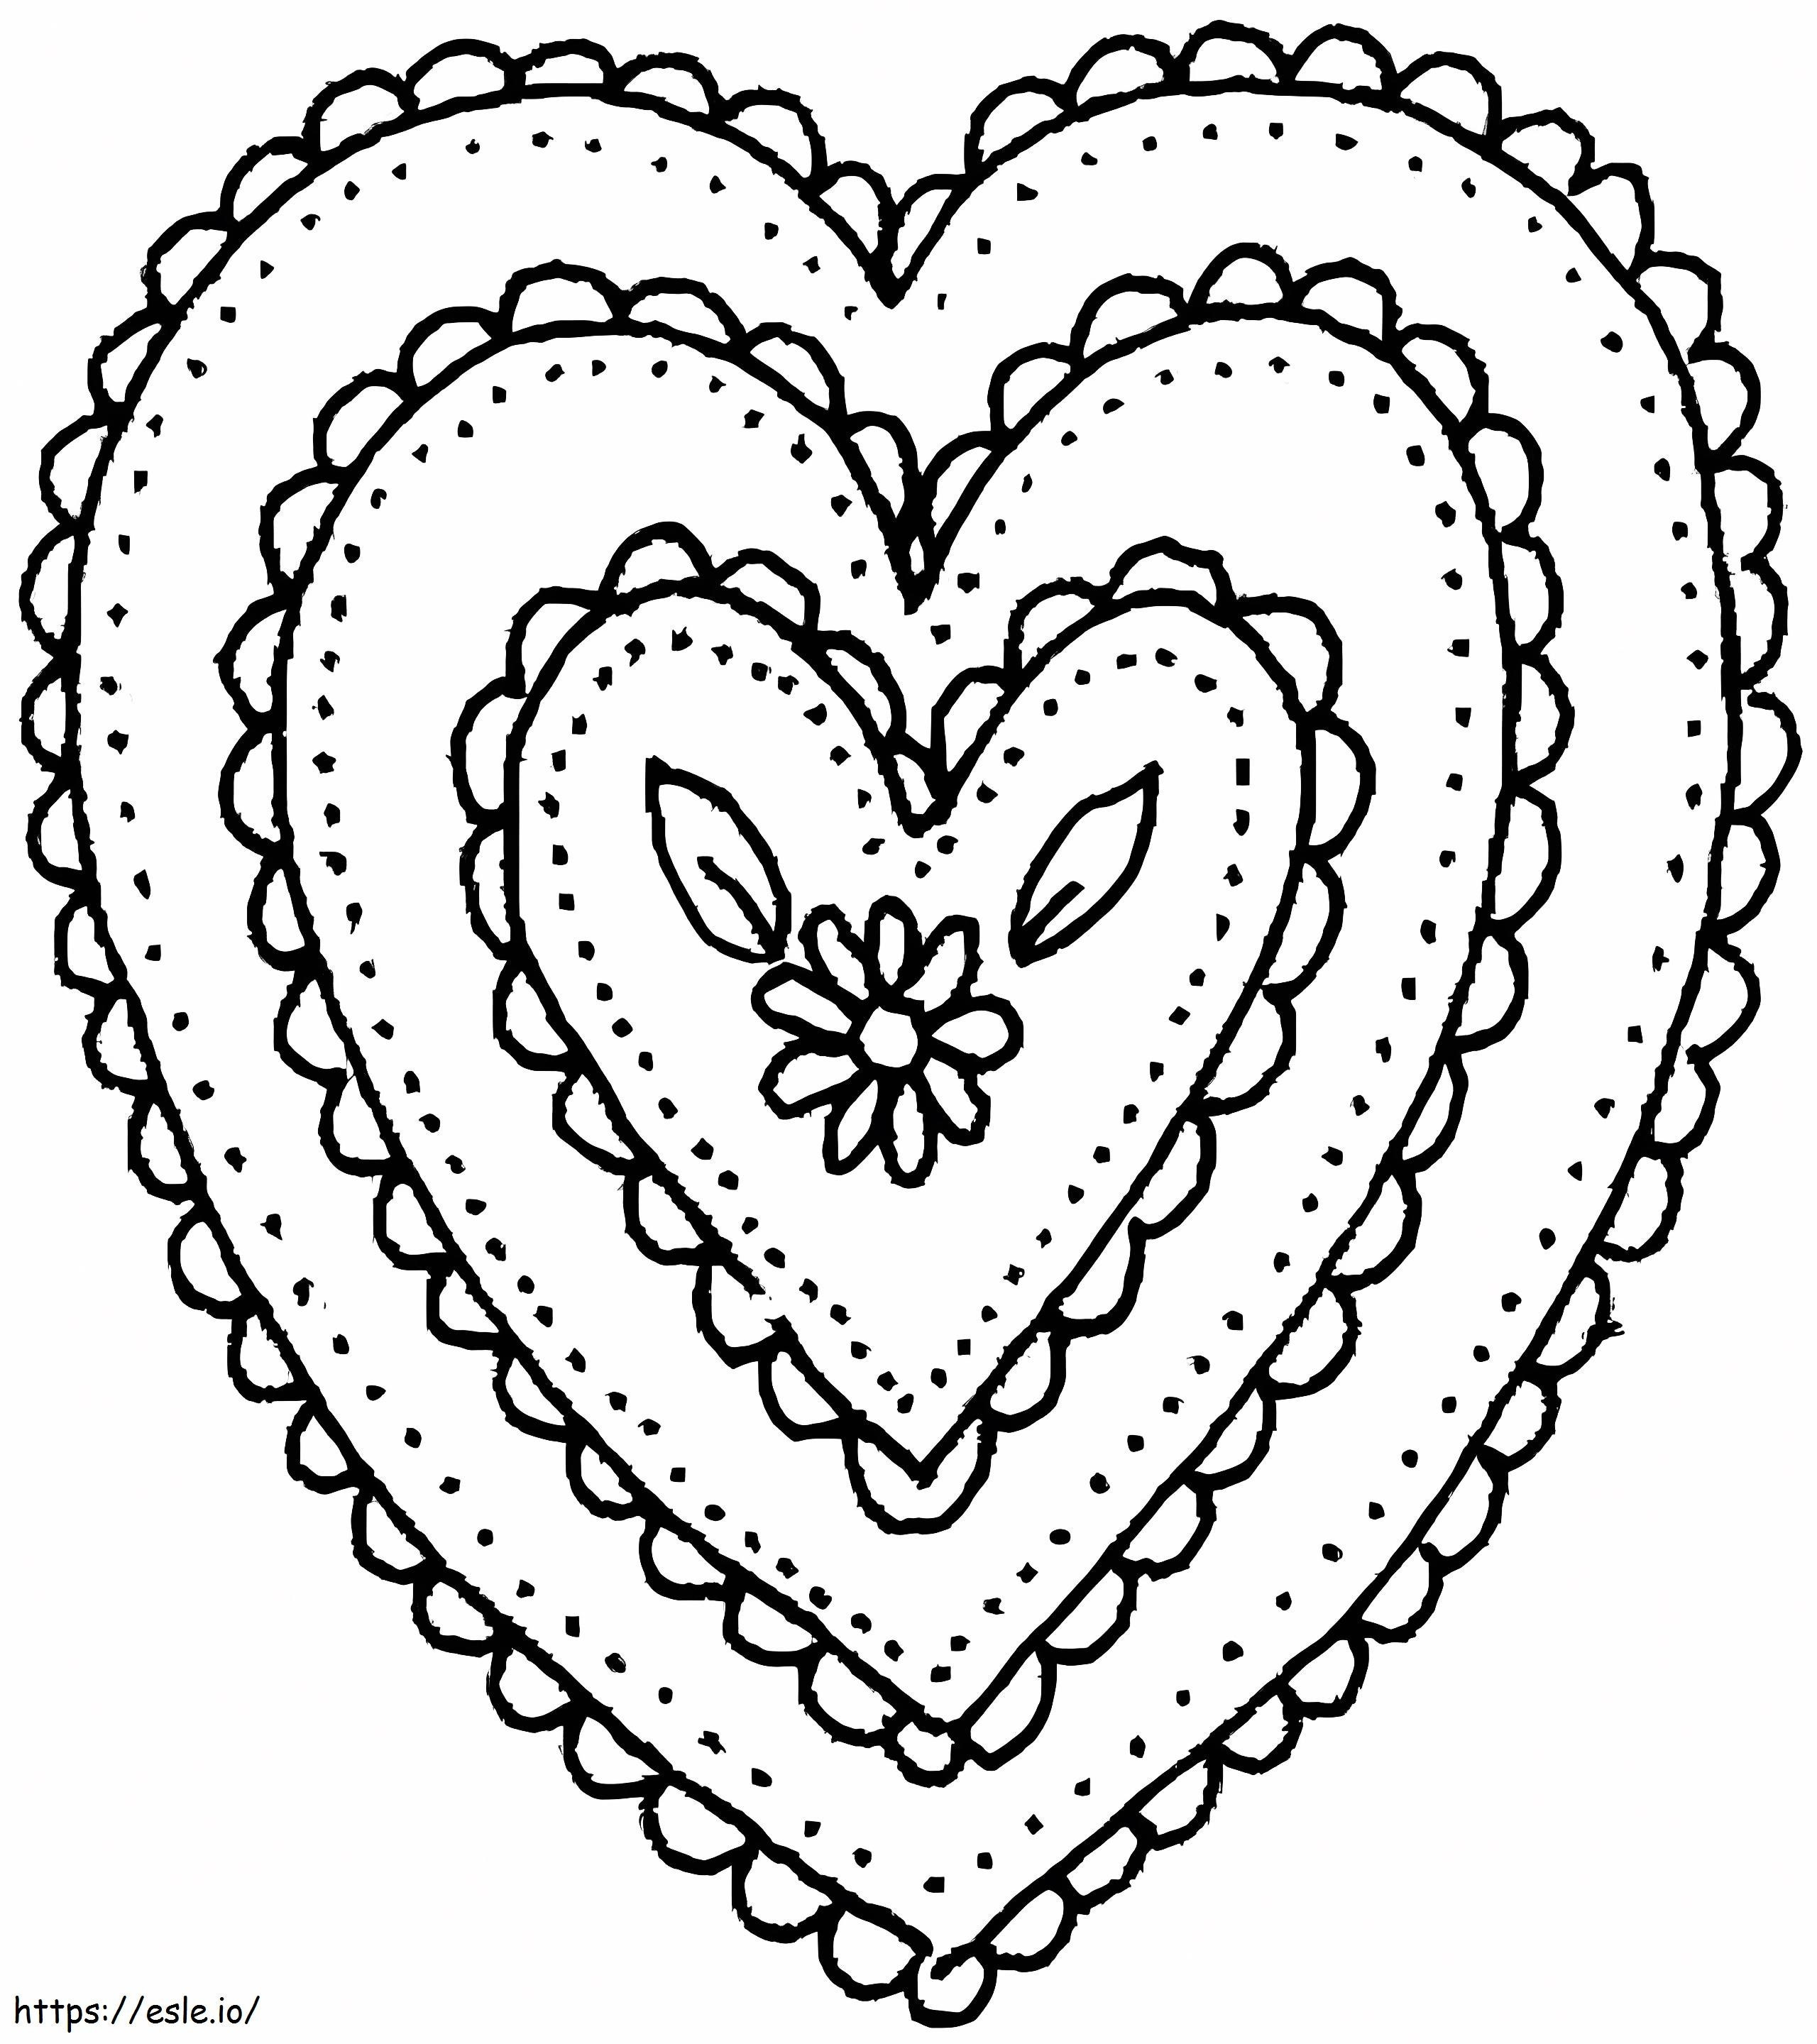 Amazing Hearts coloring page